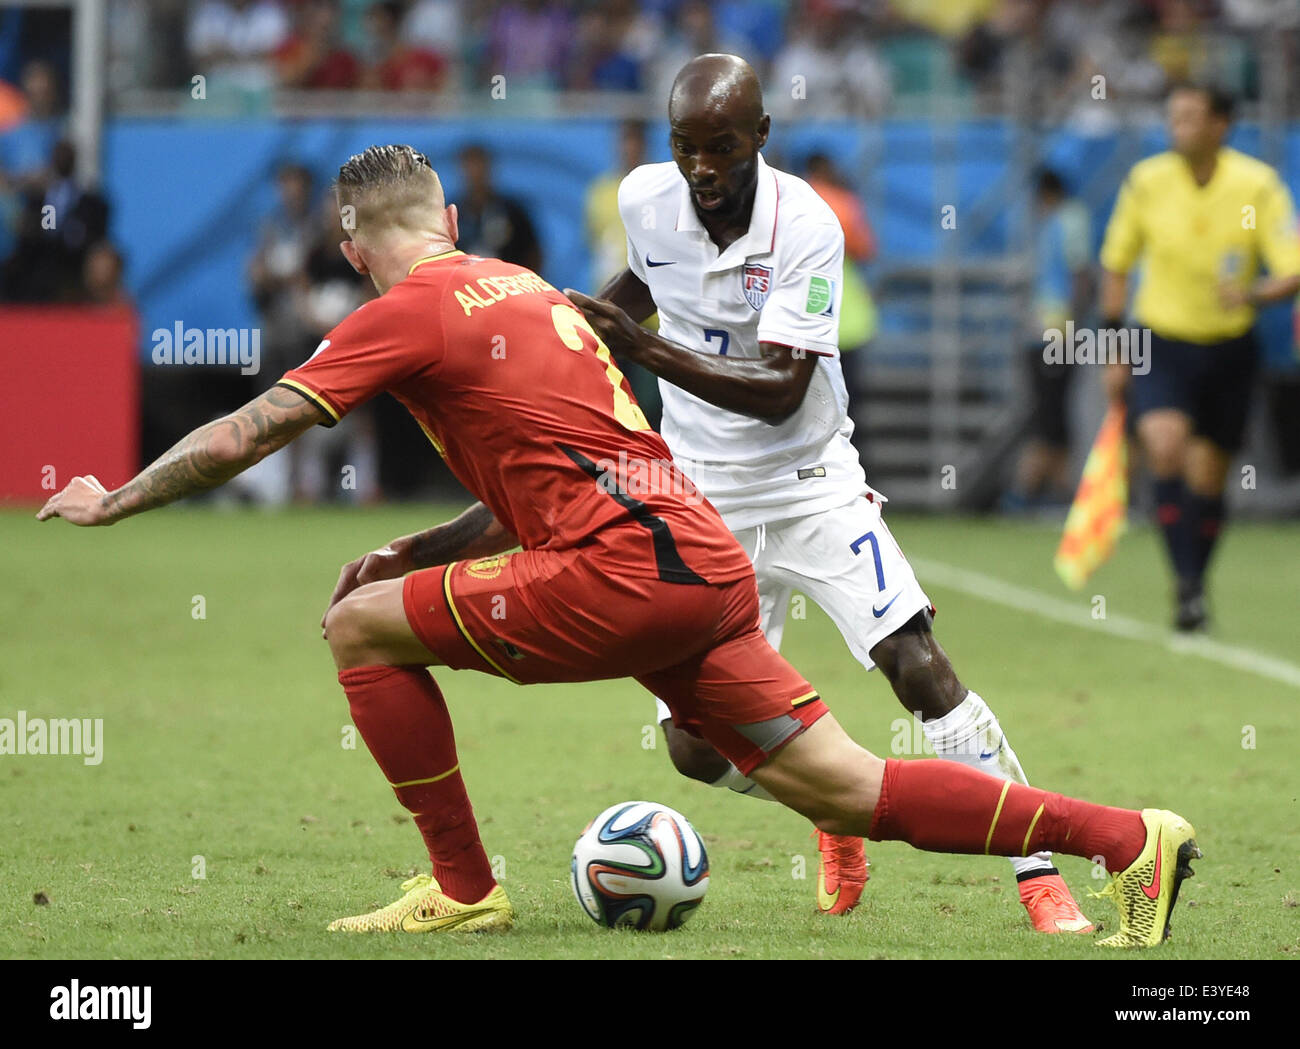 Salvador, Brazil. 1st July, 2014. DaMarcus Beasley (R) of the U.S. vies with Belgium's Toby Alderweireld during a Round of 16 match between Belgium and the U.S. of 2014 FIFA World Cup at the Arena Fonte Nova Stadium in Salvador, Brazil, on July 1, 2014. Credit:  Lui Siu Wai/Xinhua/Alamy Live News Stock Photo